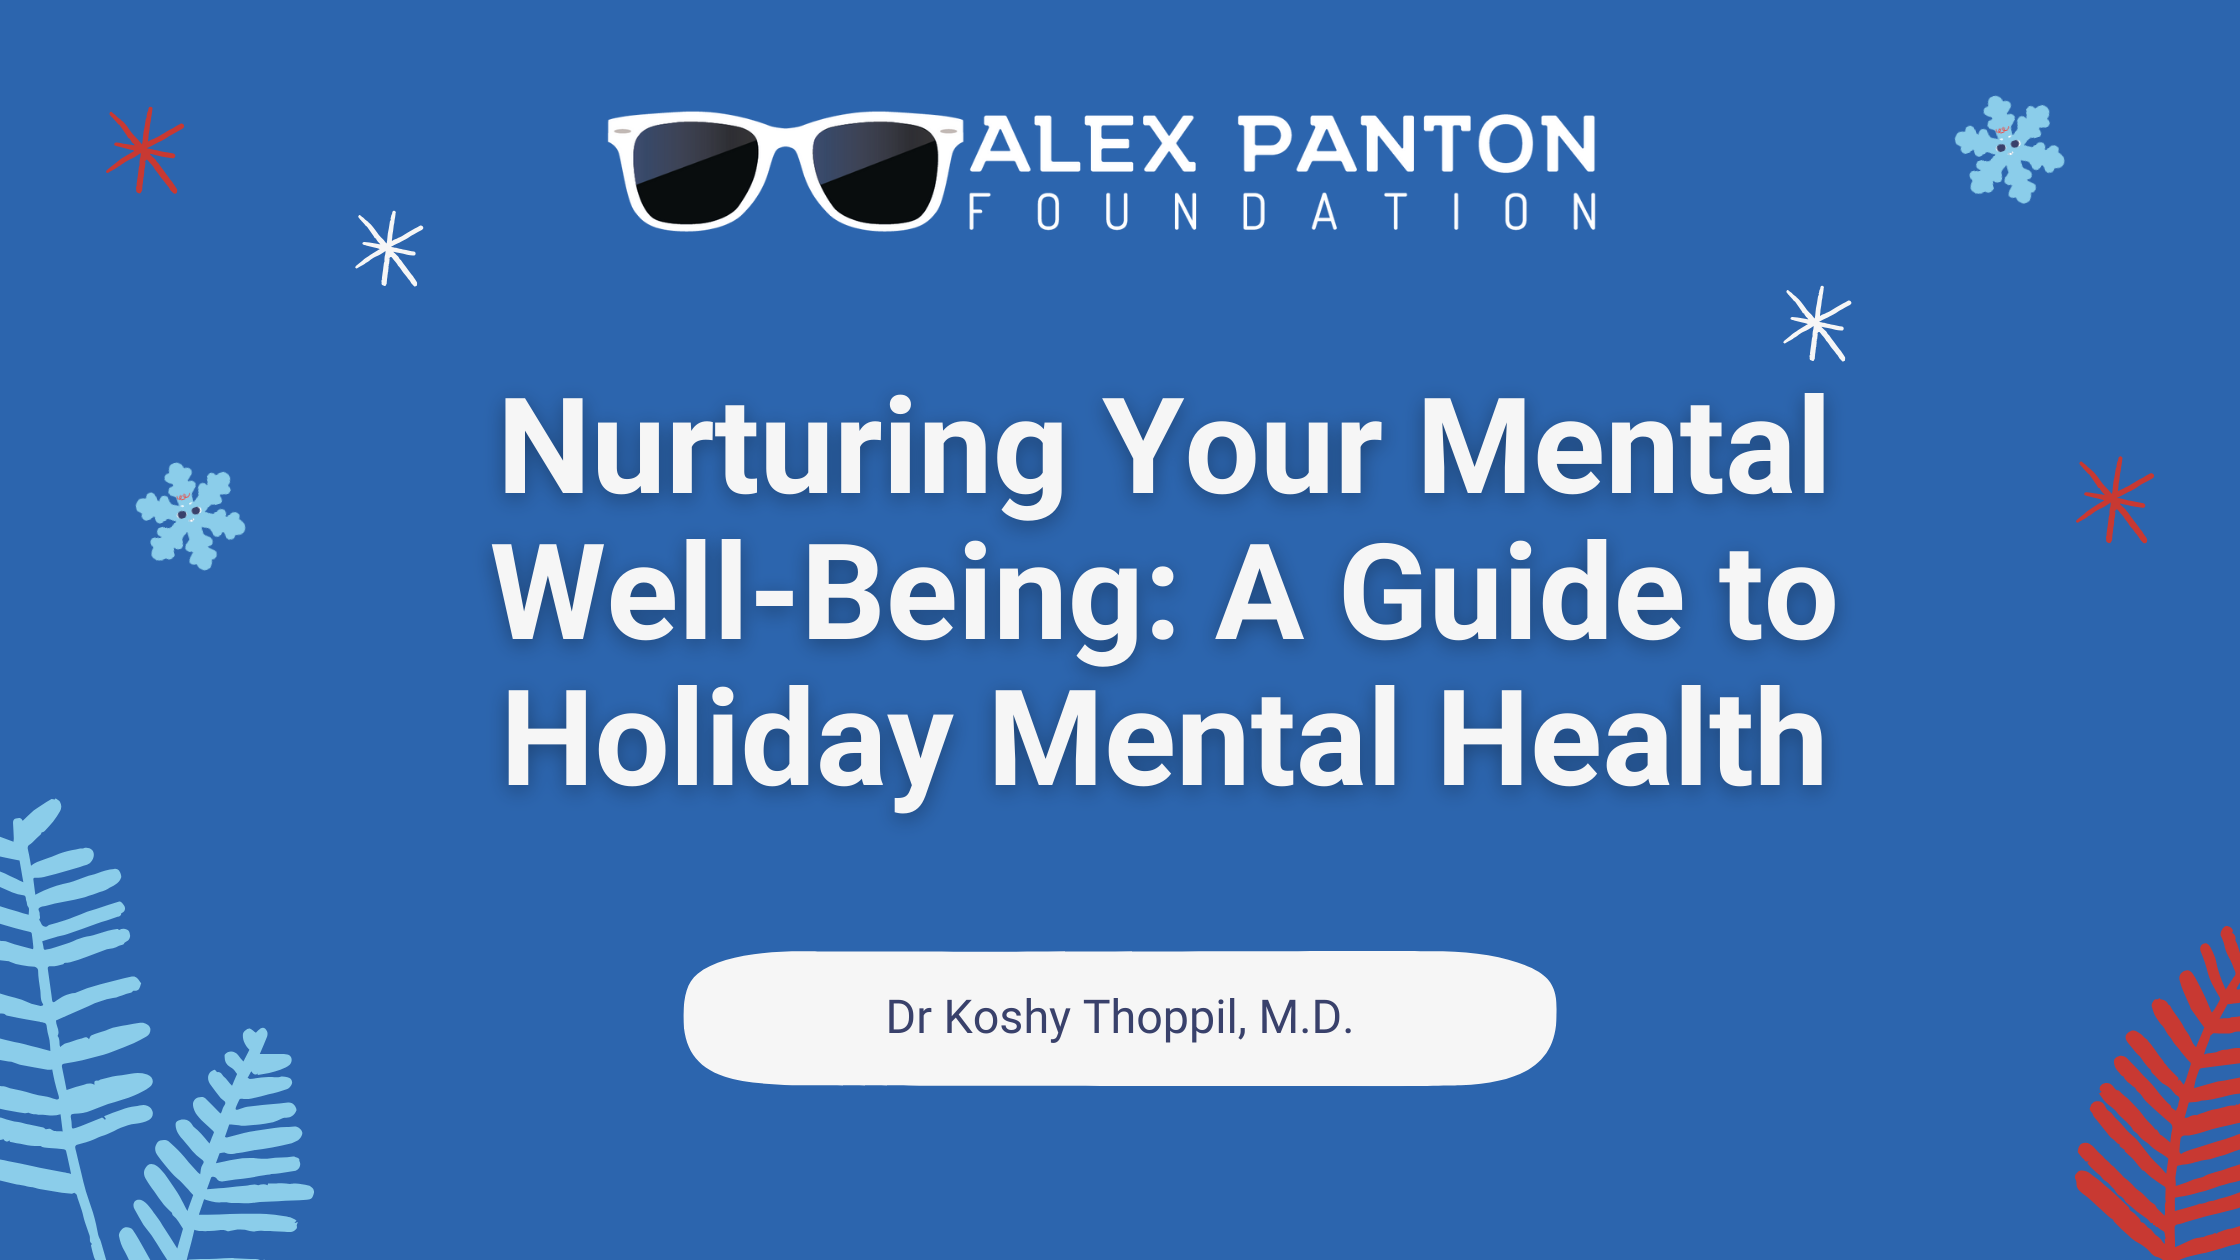 Nurturing Your Mental Well-being: A Guide to Holiday Mental Health by Dr Koshy Thoppil, M.D.